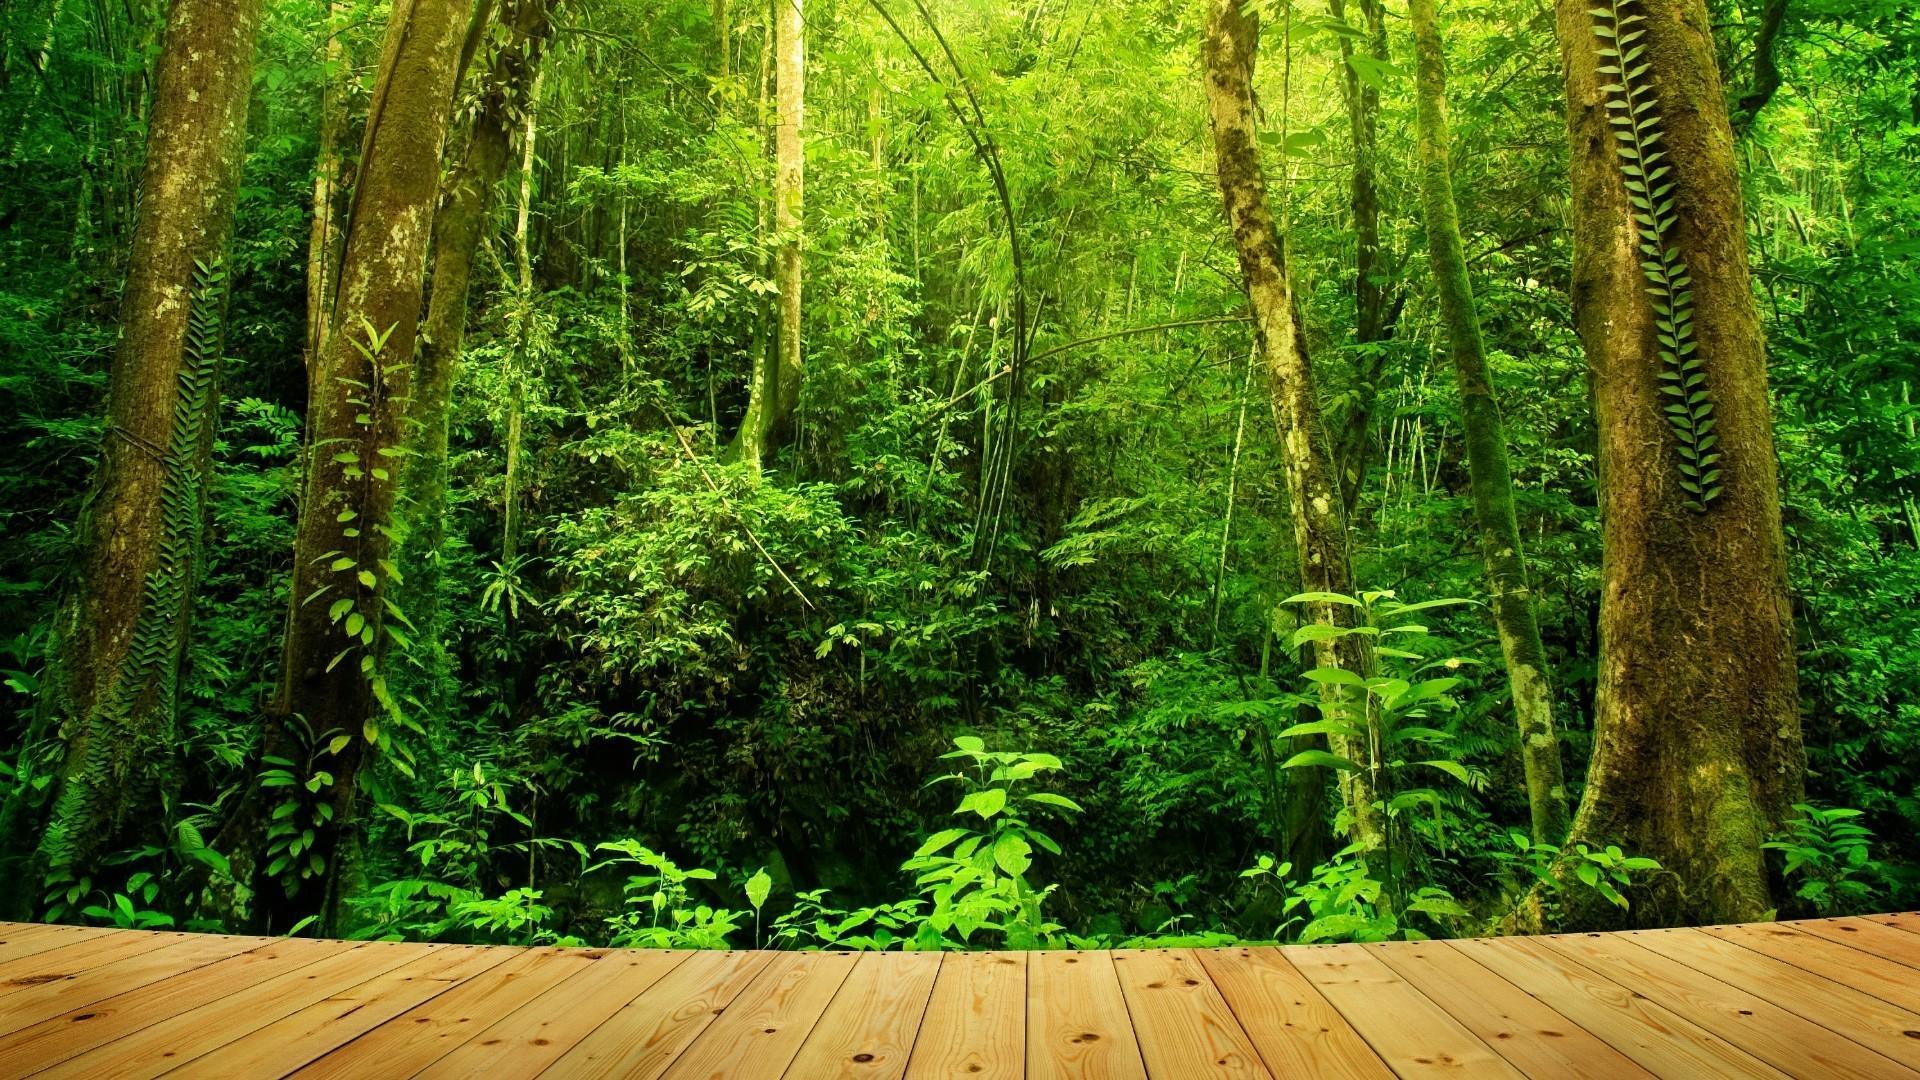 Tropical Forest Wallpaper, Free Stock Wallpaper